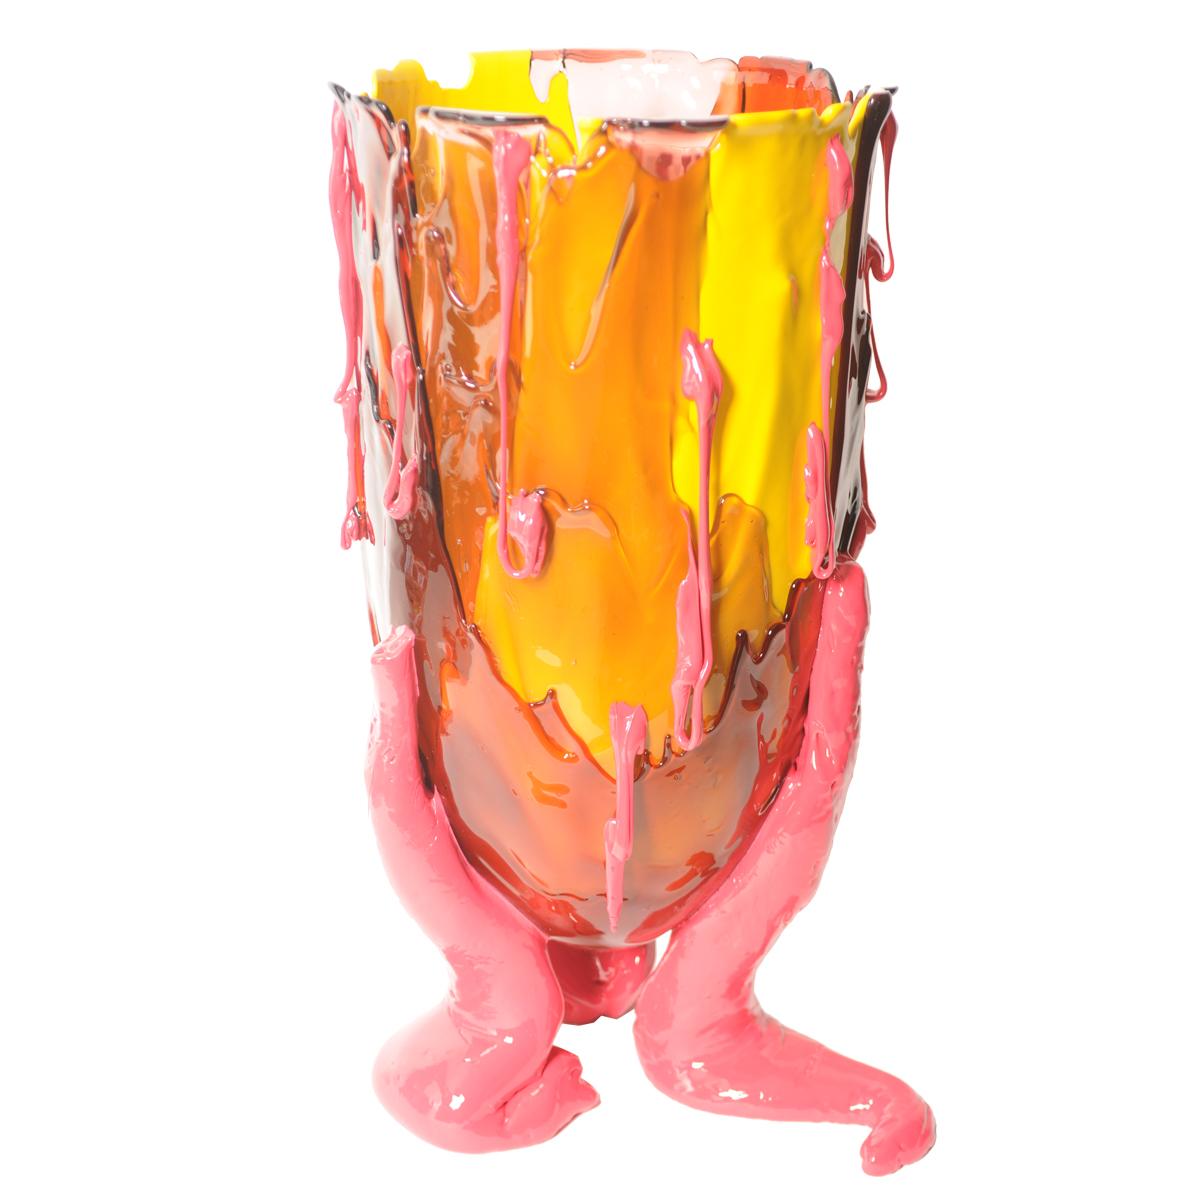 Clear special extra color vase - Matt Warm Yellow, Dark Ruby, Clear Pink, Matt Fuchsia
Vase in soft resin designed by Gaetano Pesce in 1995 for Fish Design collection.

Measures: XL - ø 30cm x H 56cm

Other sizes available.

Colours: Matt Warm